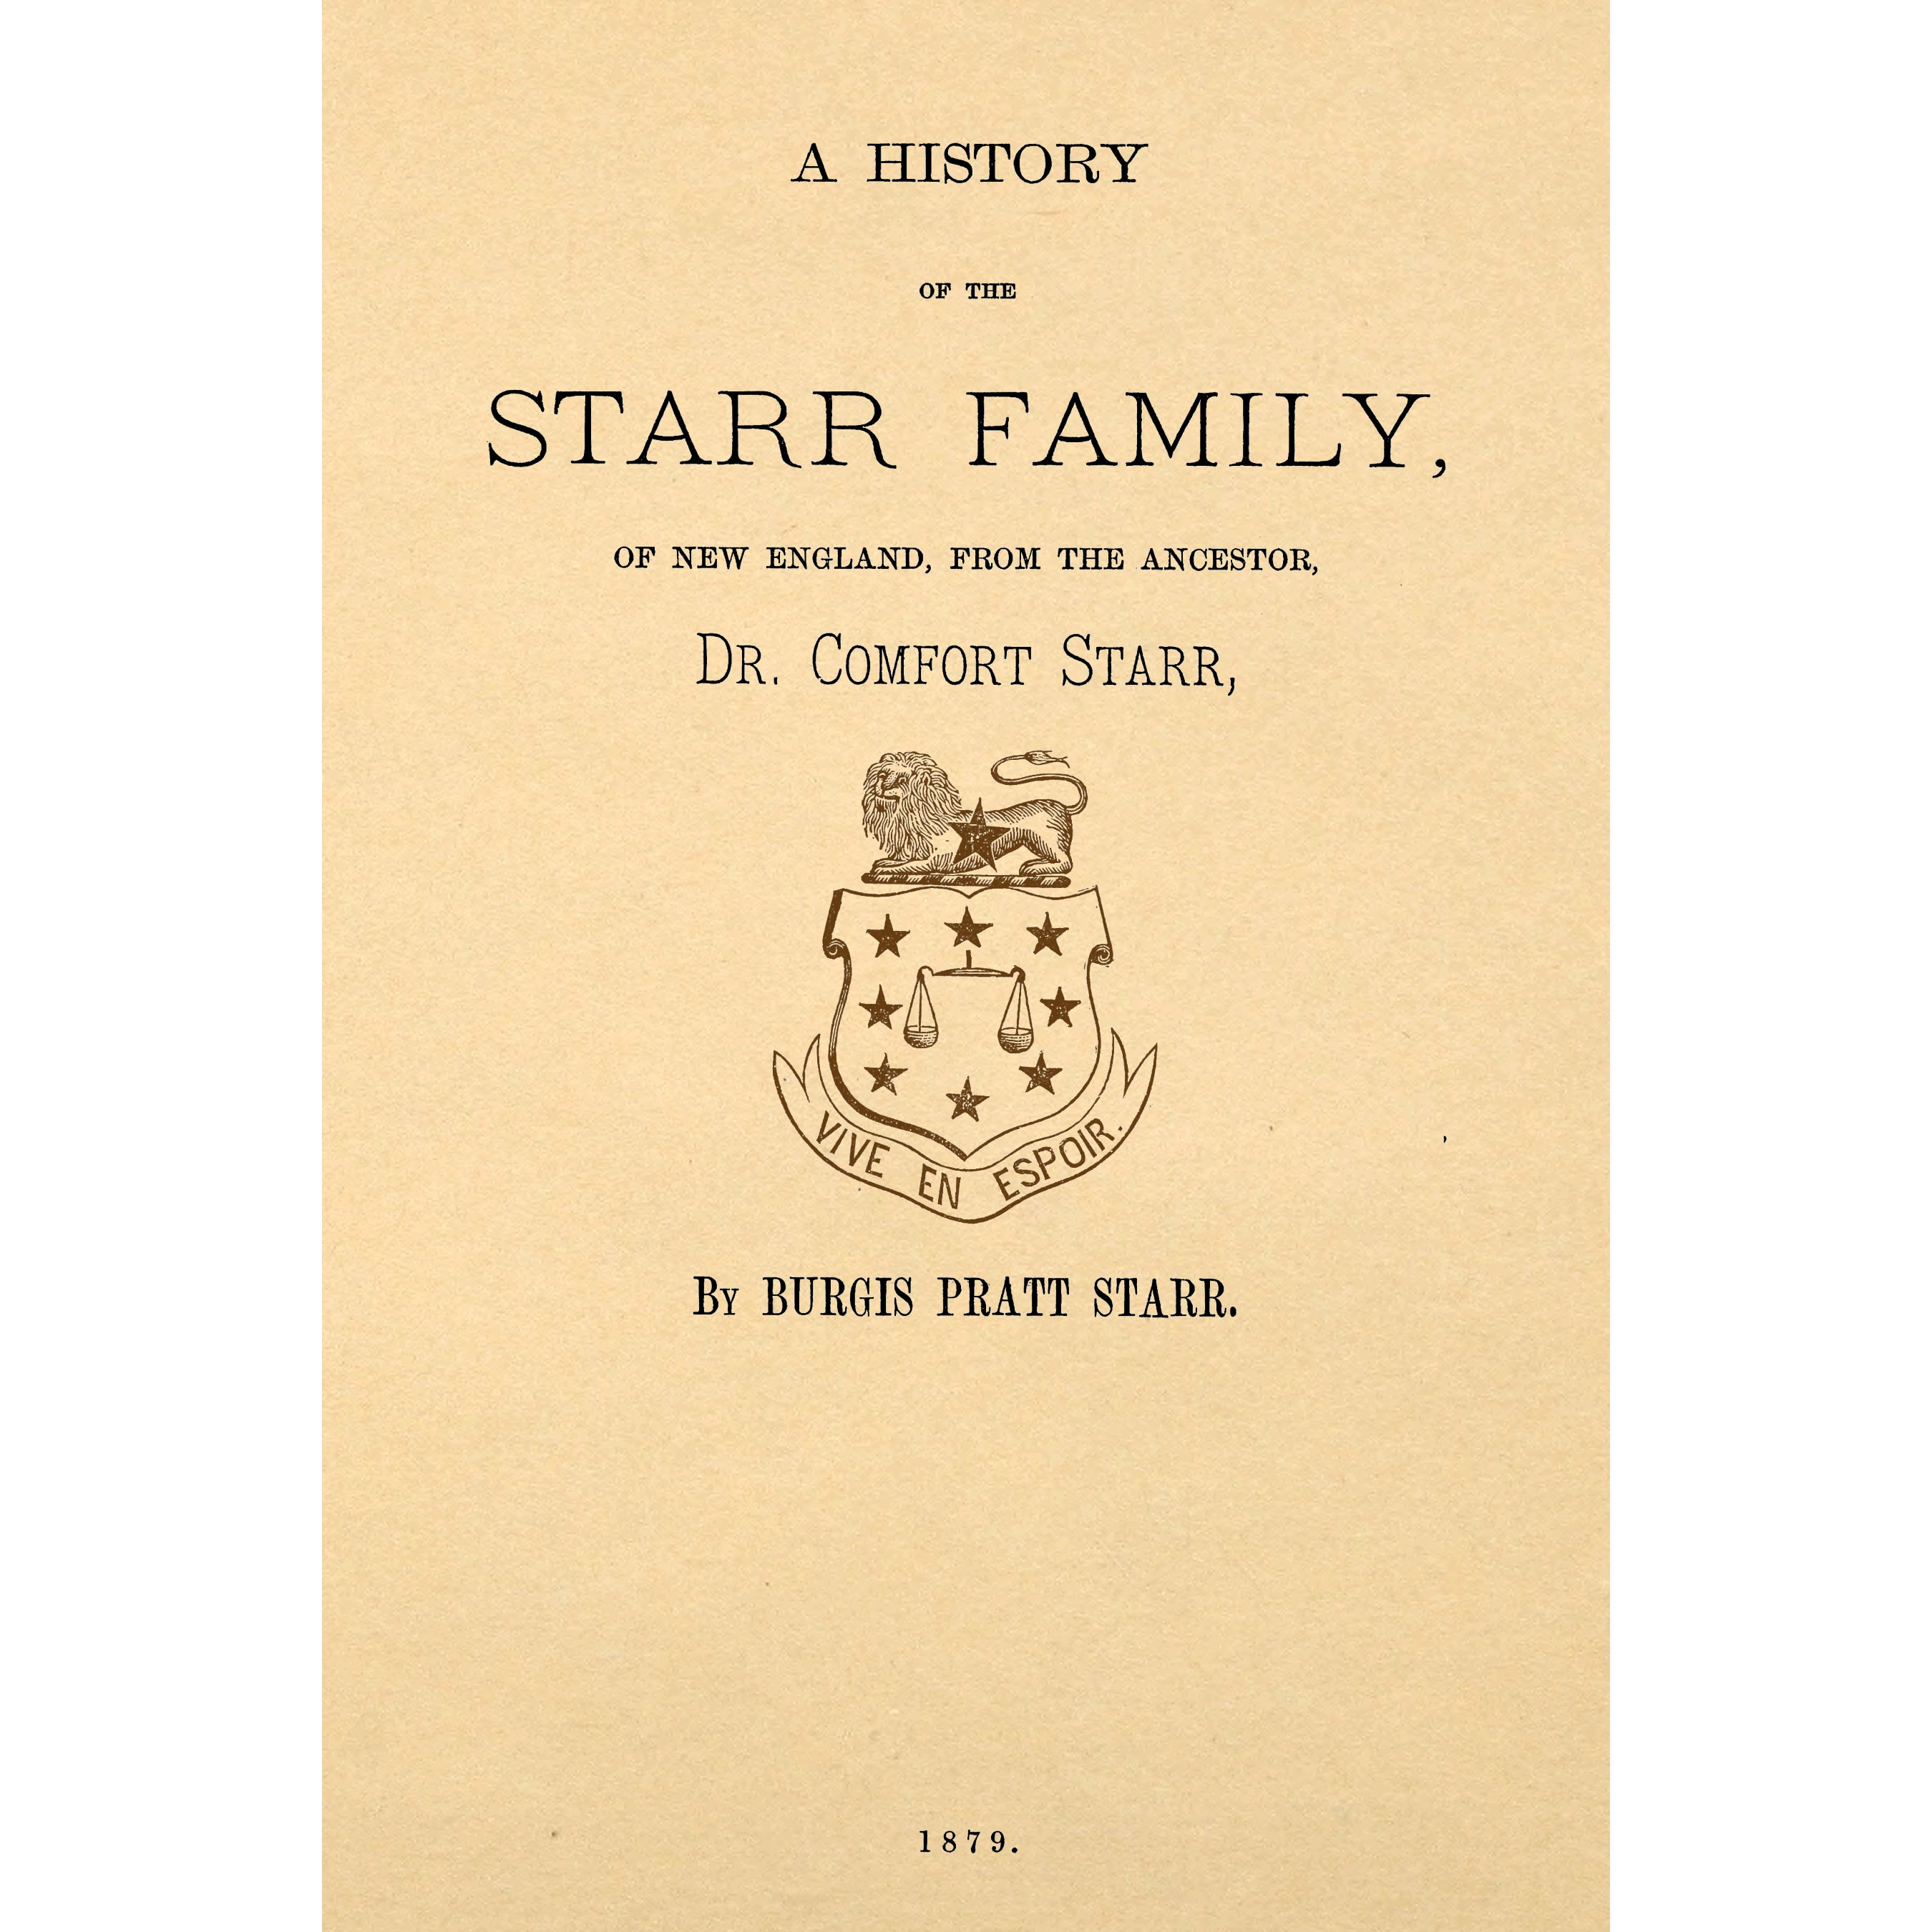 A history of the Starr family of New England